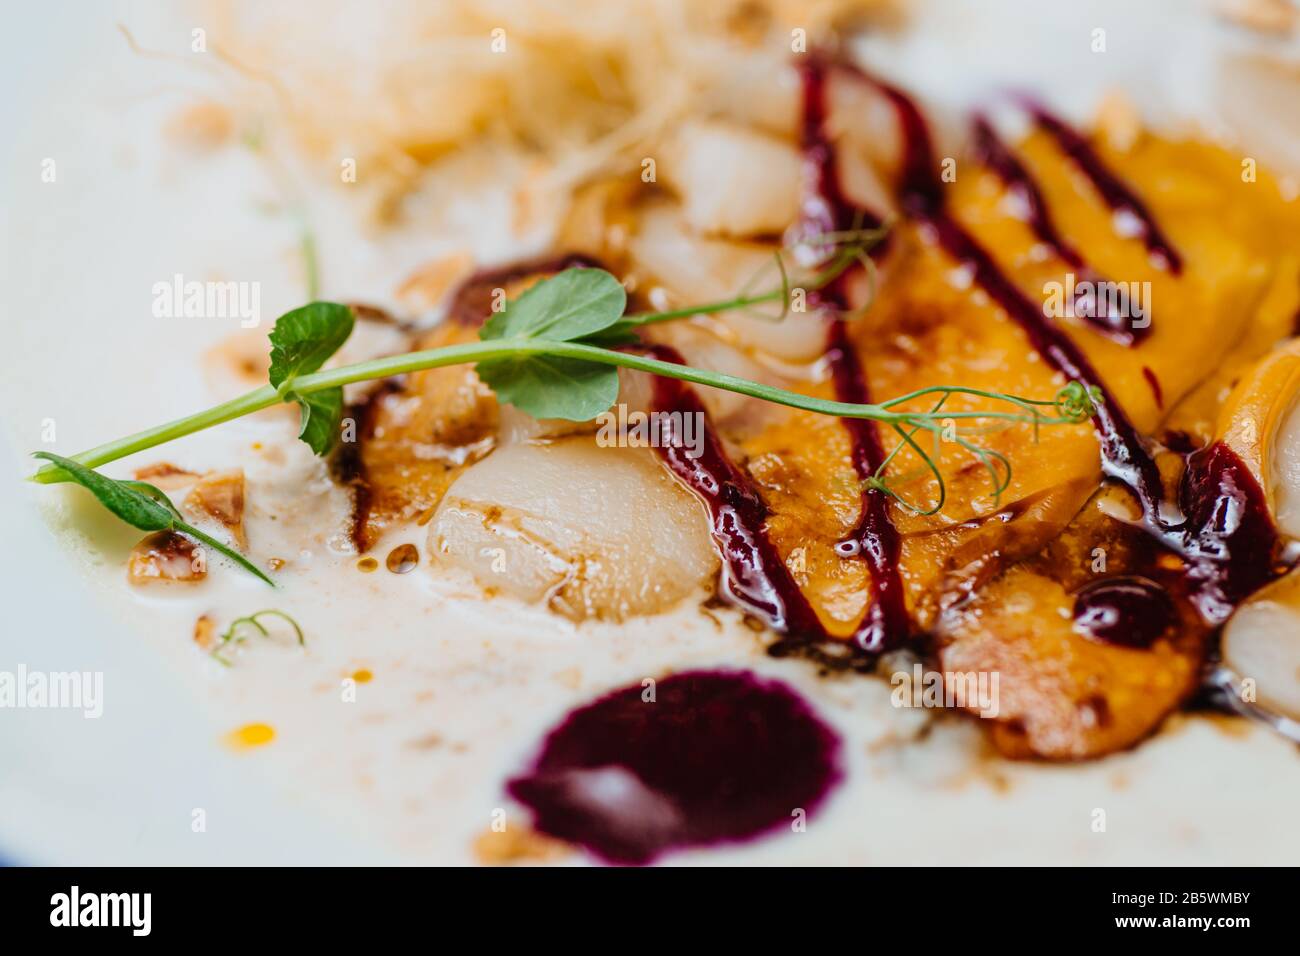 Scallop ceviche and foie gras with hazelnut, ready to serve. Stock Photo